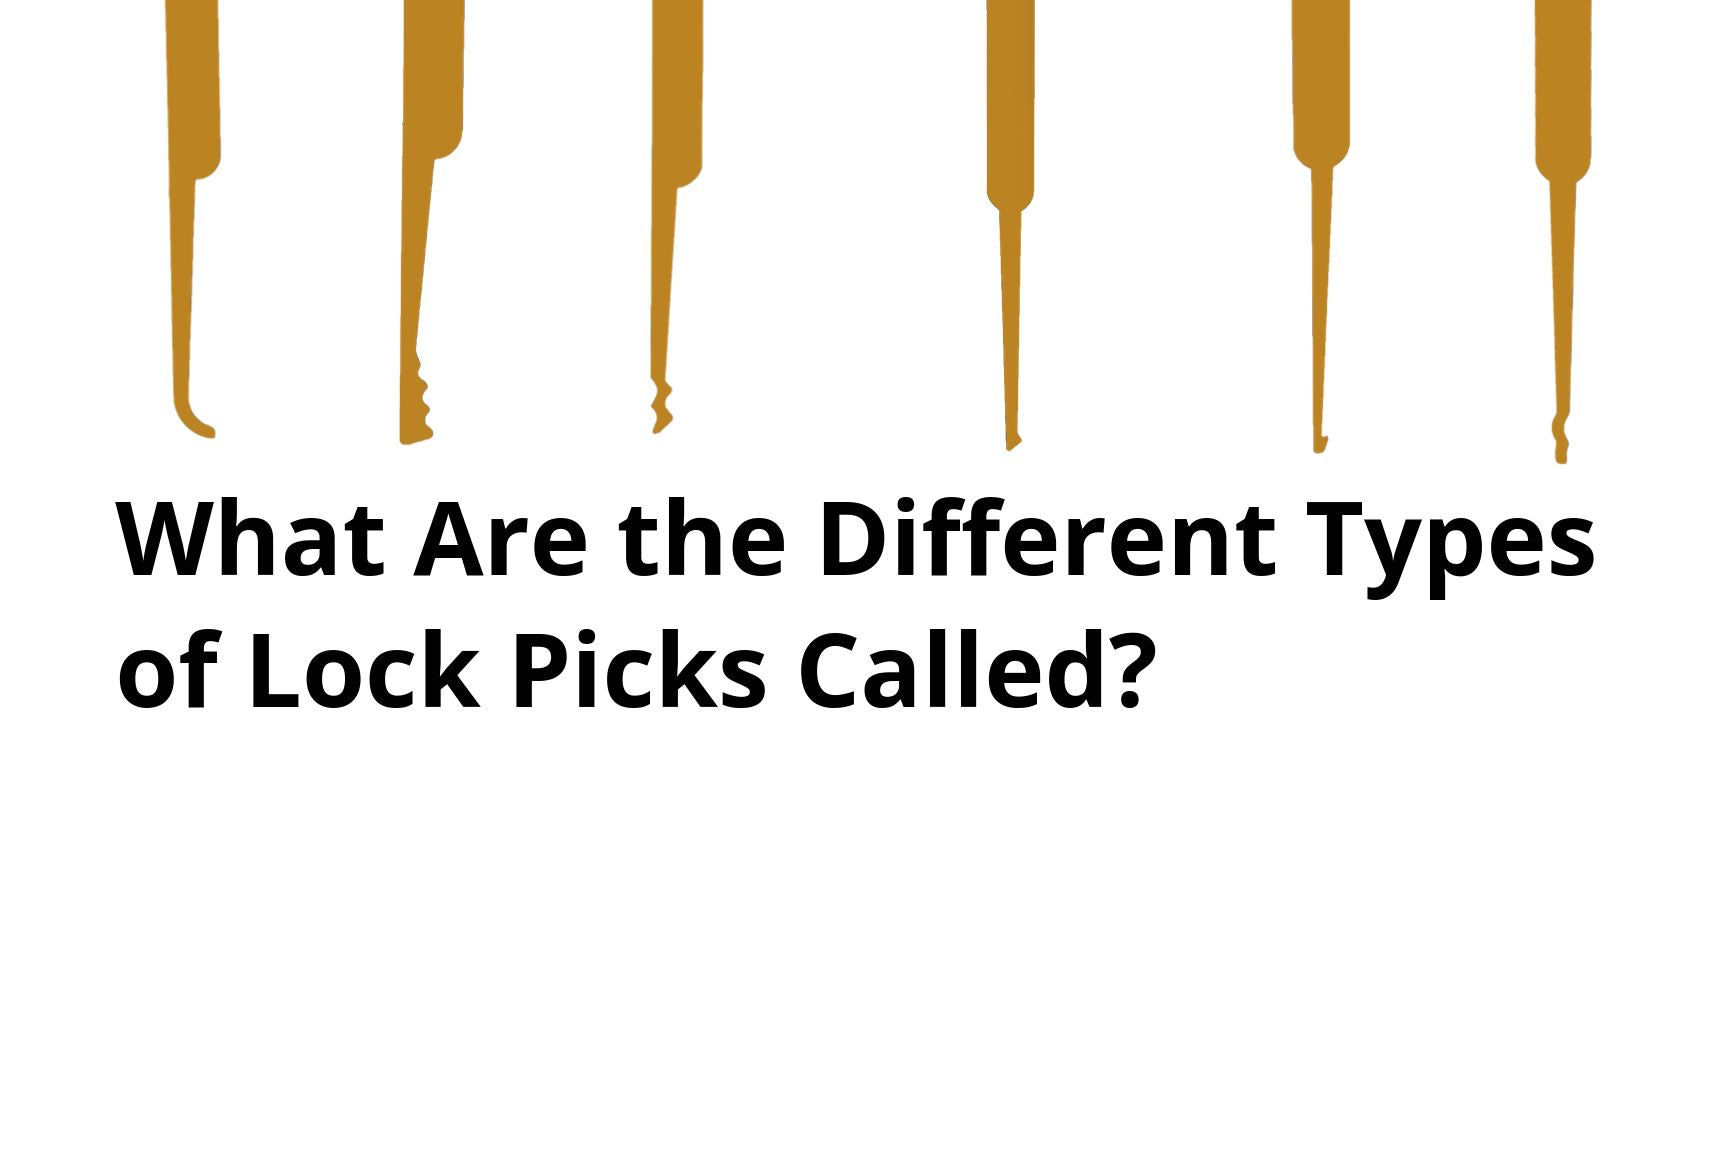 What are the Different Types of Lock Picks? – SubtleDigs